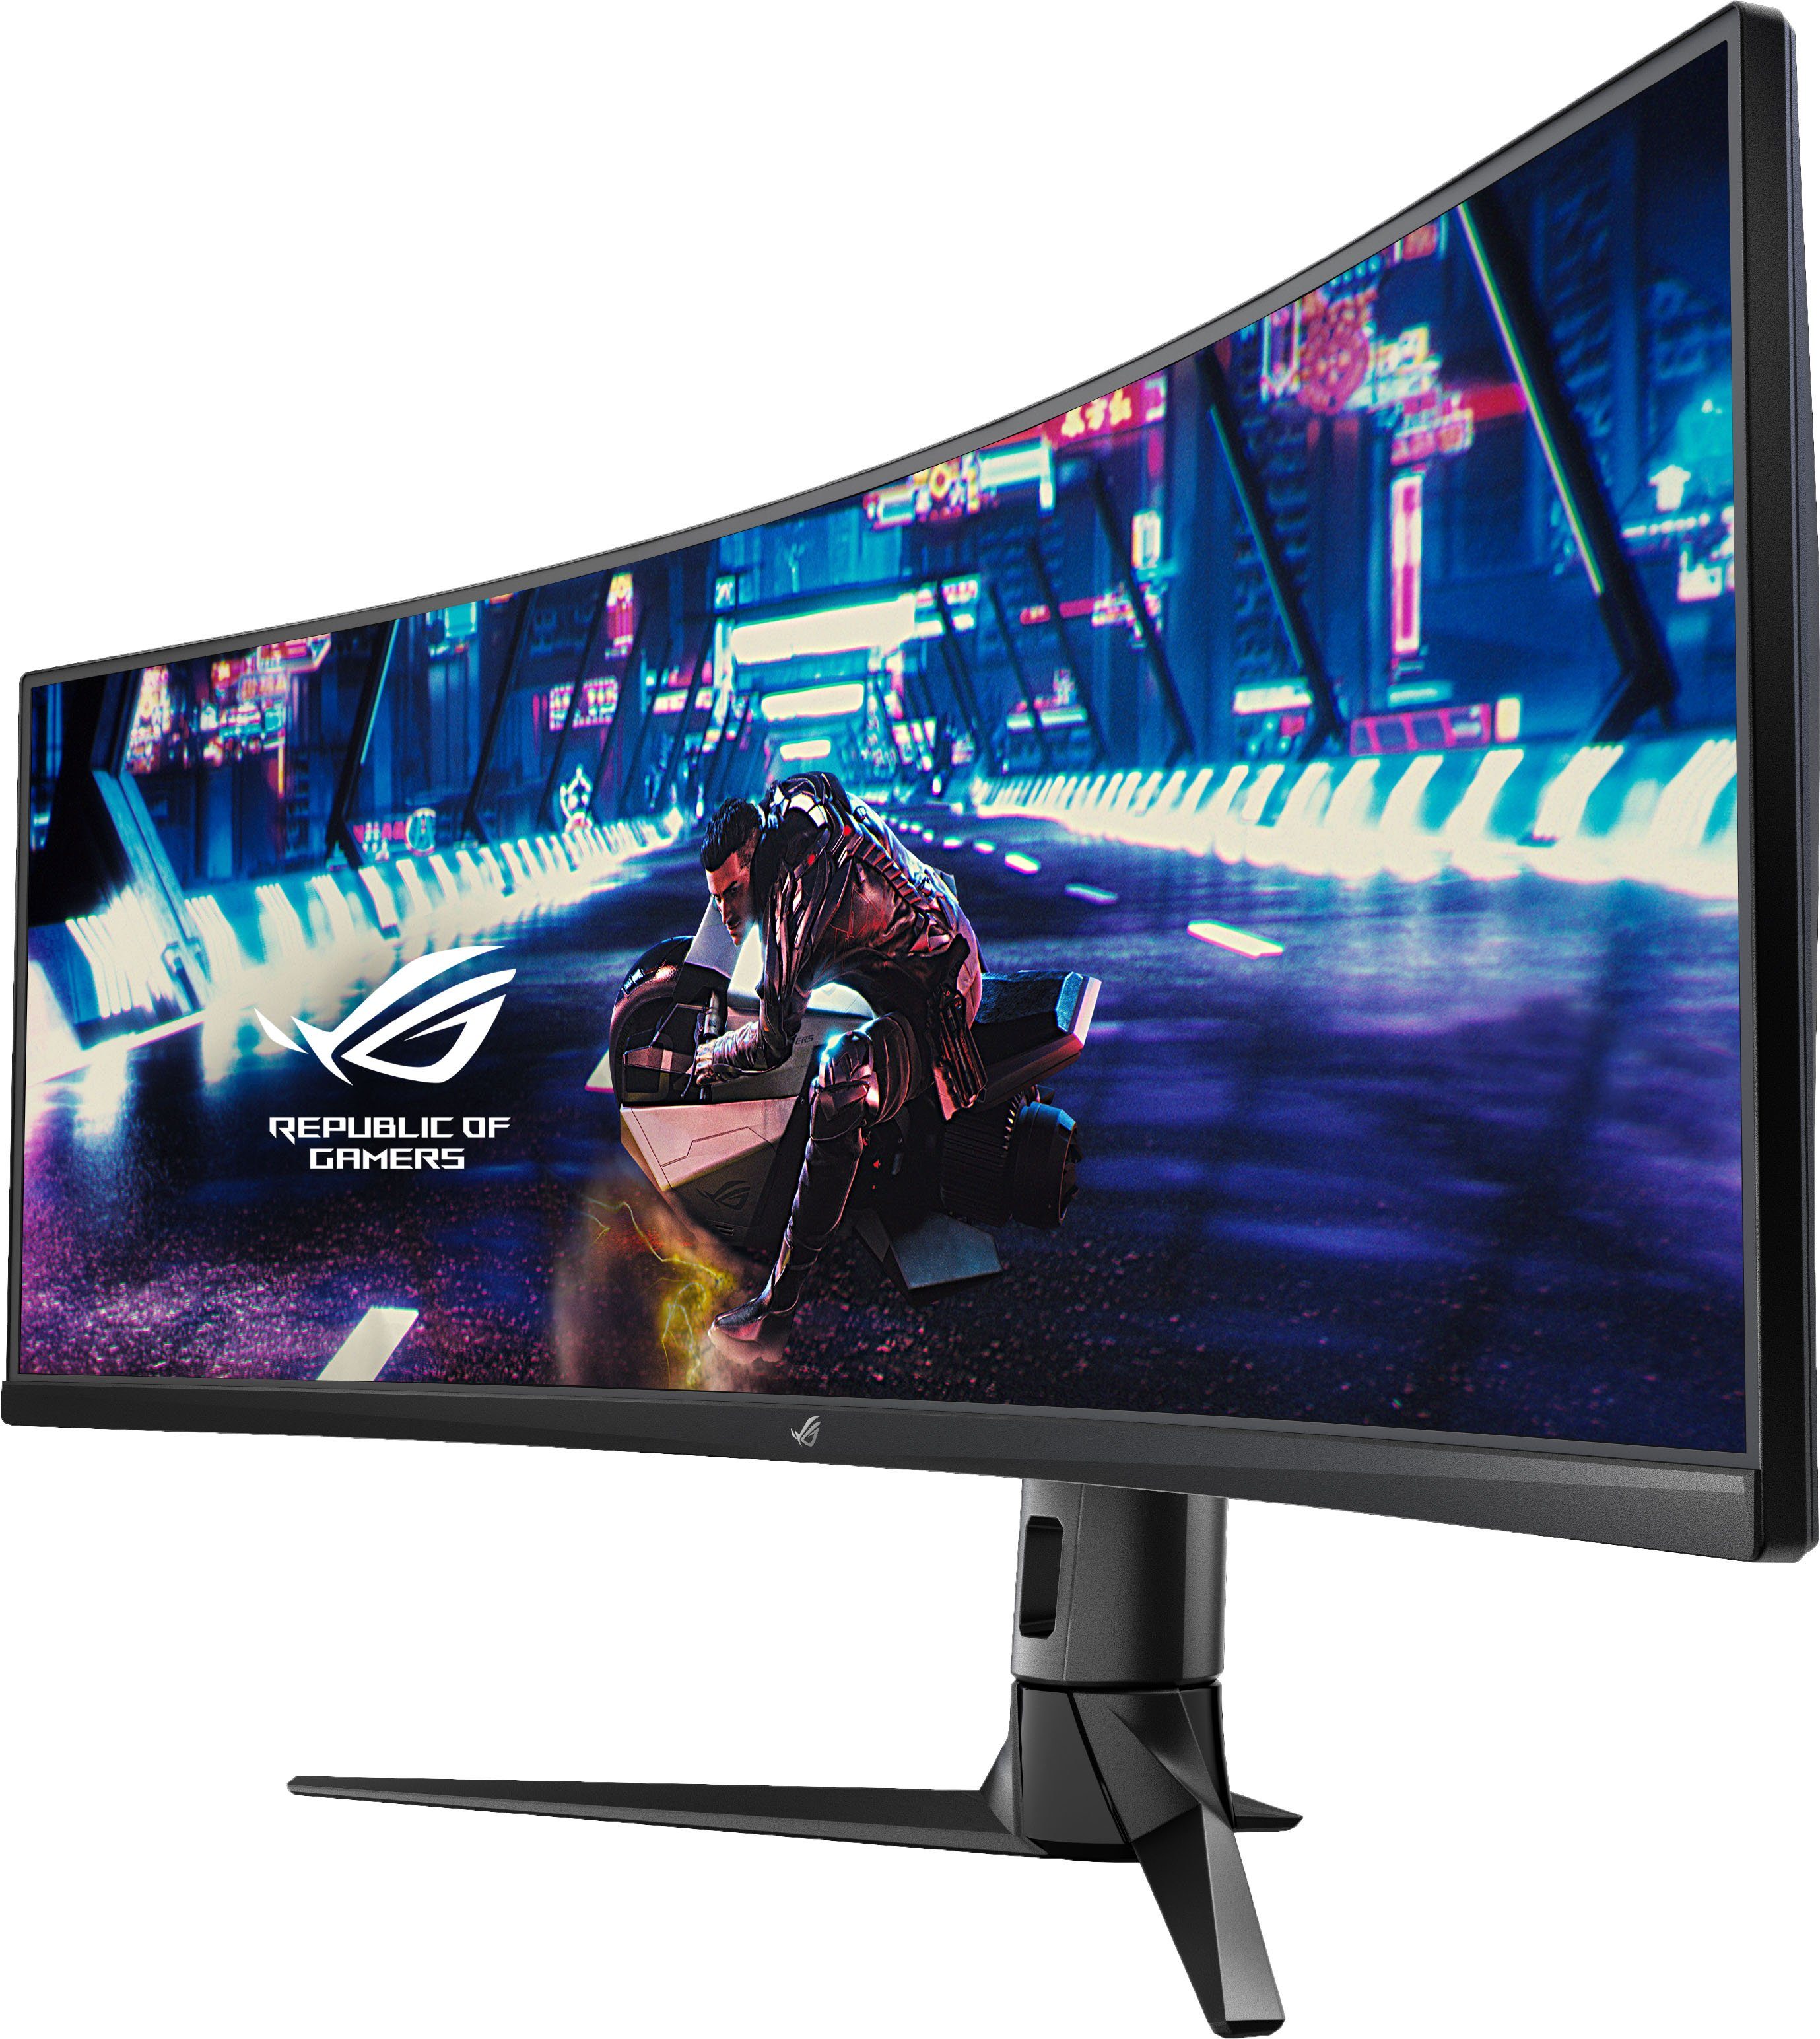 HD, 3840 ms 4 Gaming x Curved-Gaming-Monitor Asus (124,46 144 Reaktionszeit, XG49VQ px, ", LED, 1080 cm/49 Full VA Monitor) Hz,